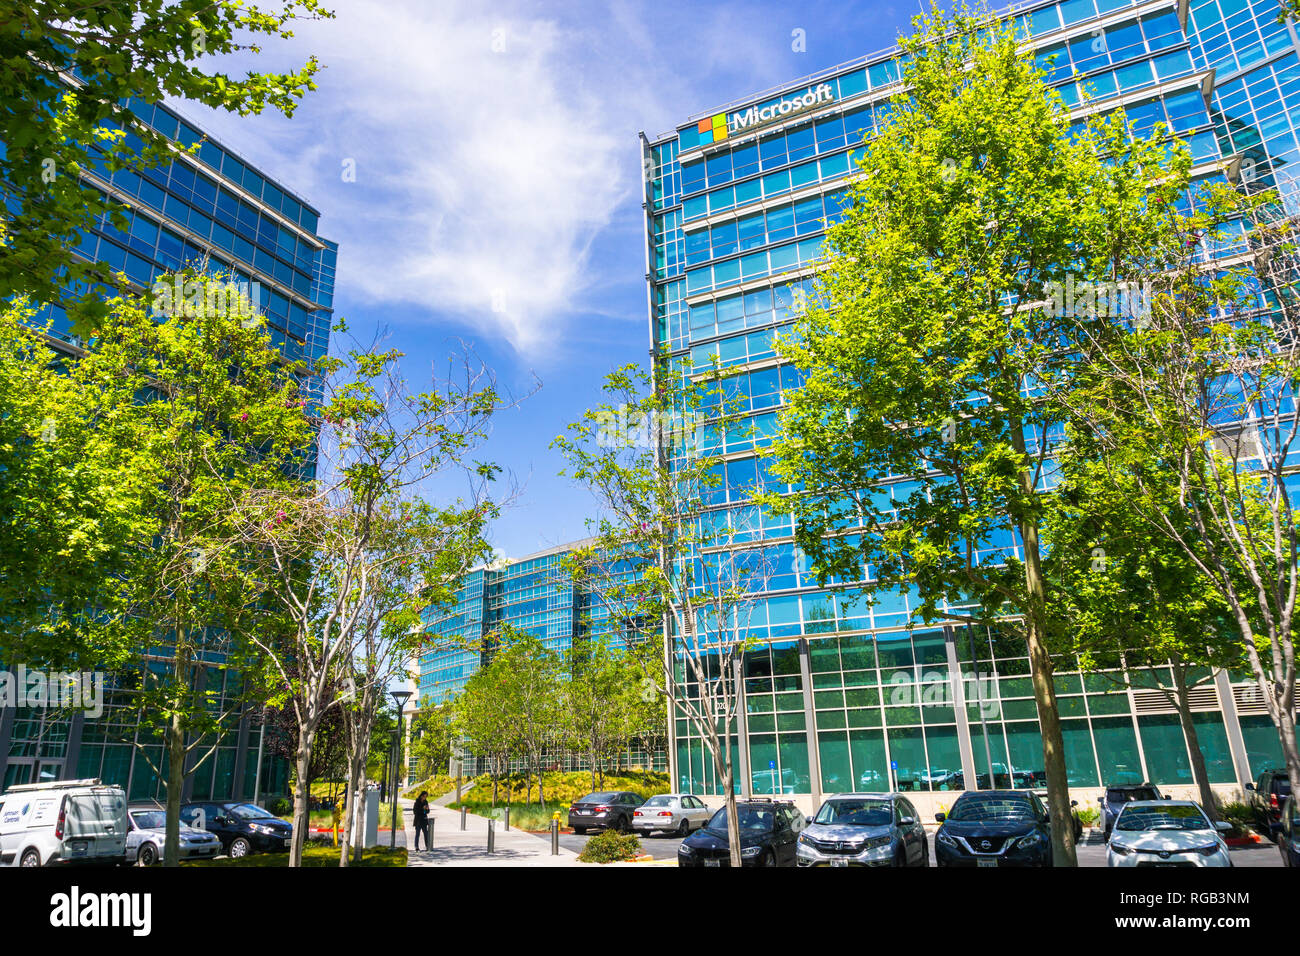 May 3 18 Sunnyvale Ca Usa Microsoft Offices Located In Silicon Valley South San Francisco Bay Area Stock Photo Alamy